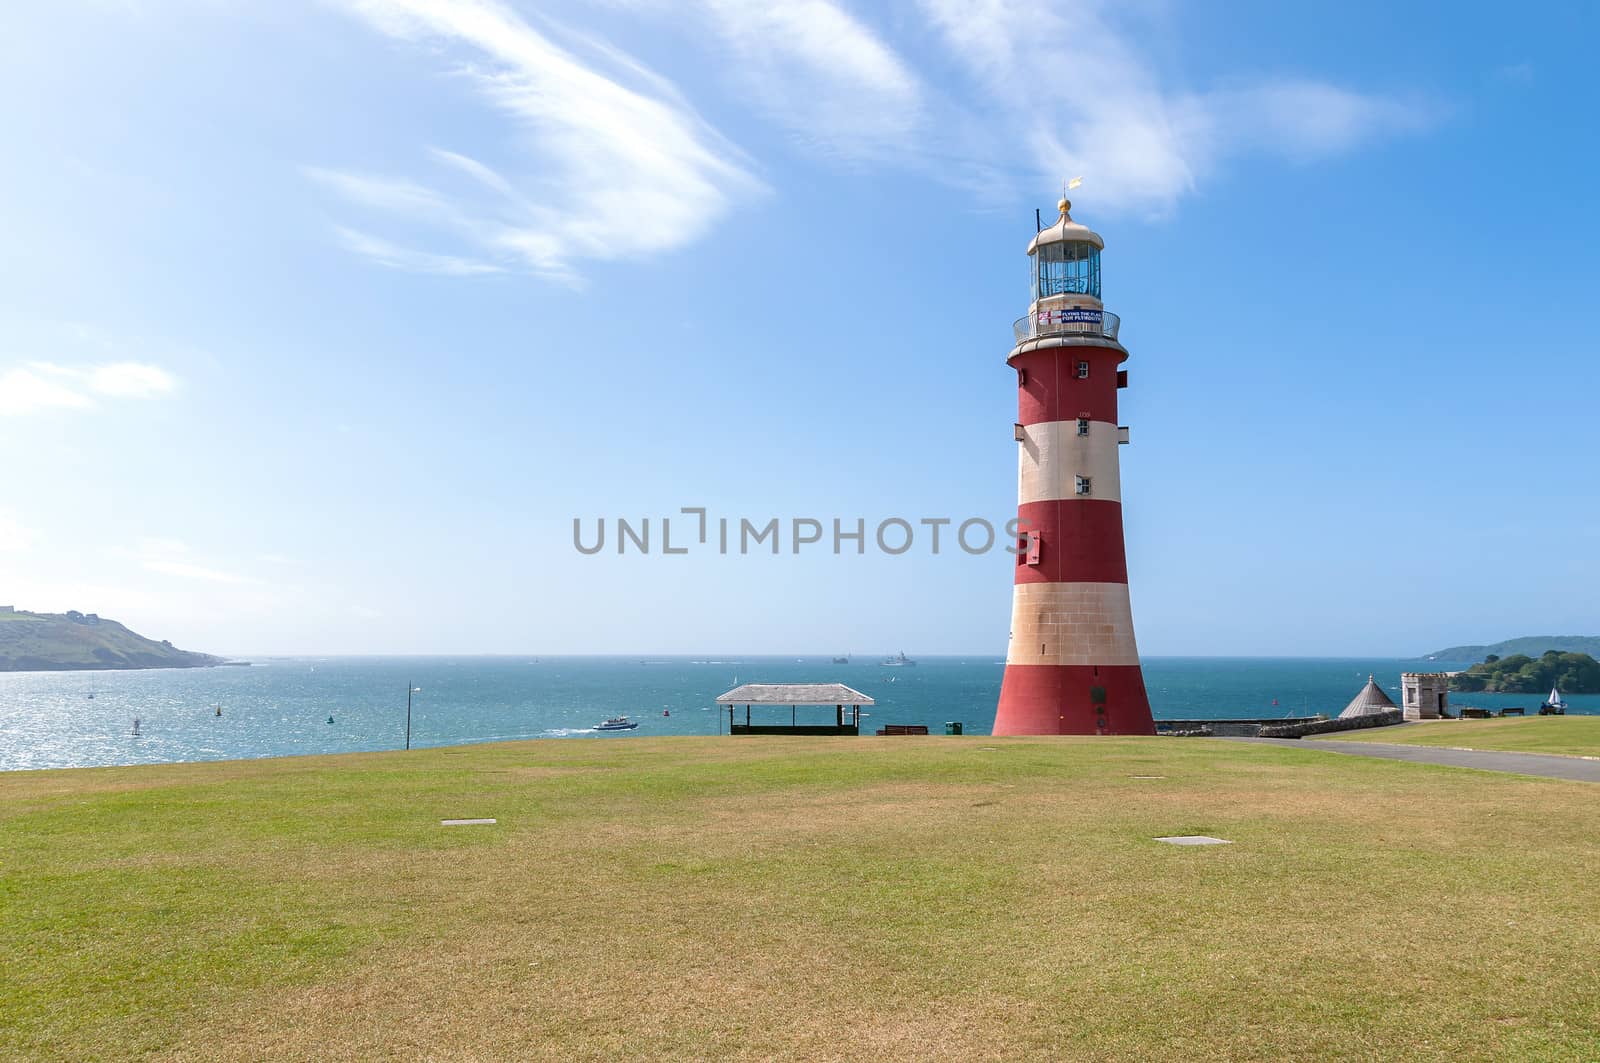 Red and white lighthouse in Plymouth, Great Britain